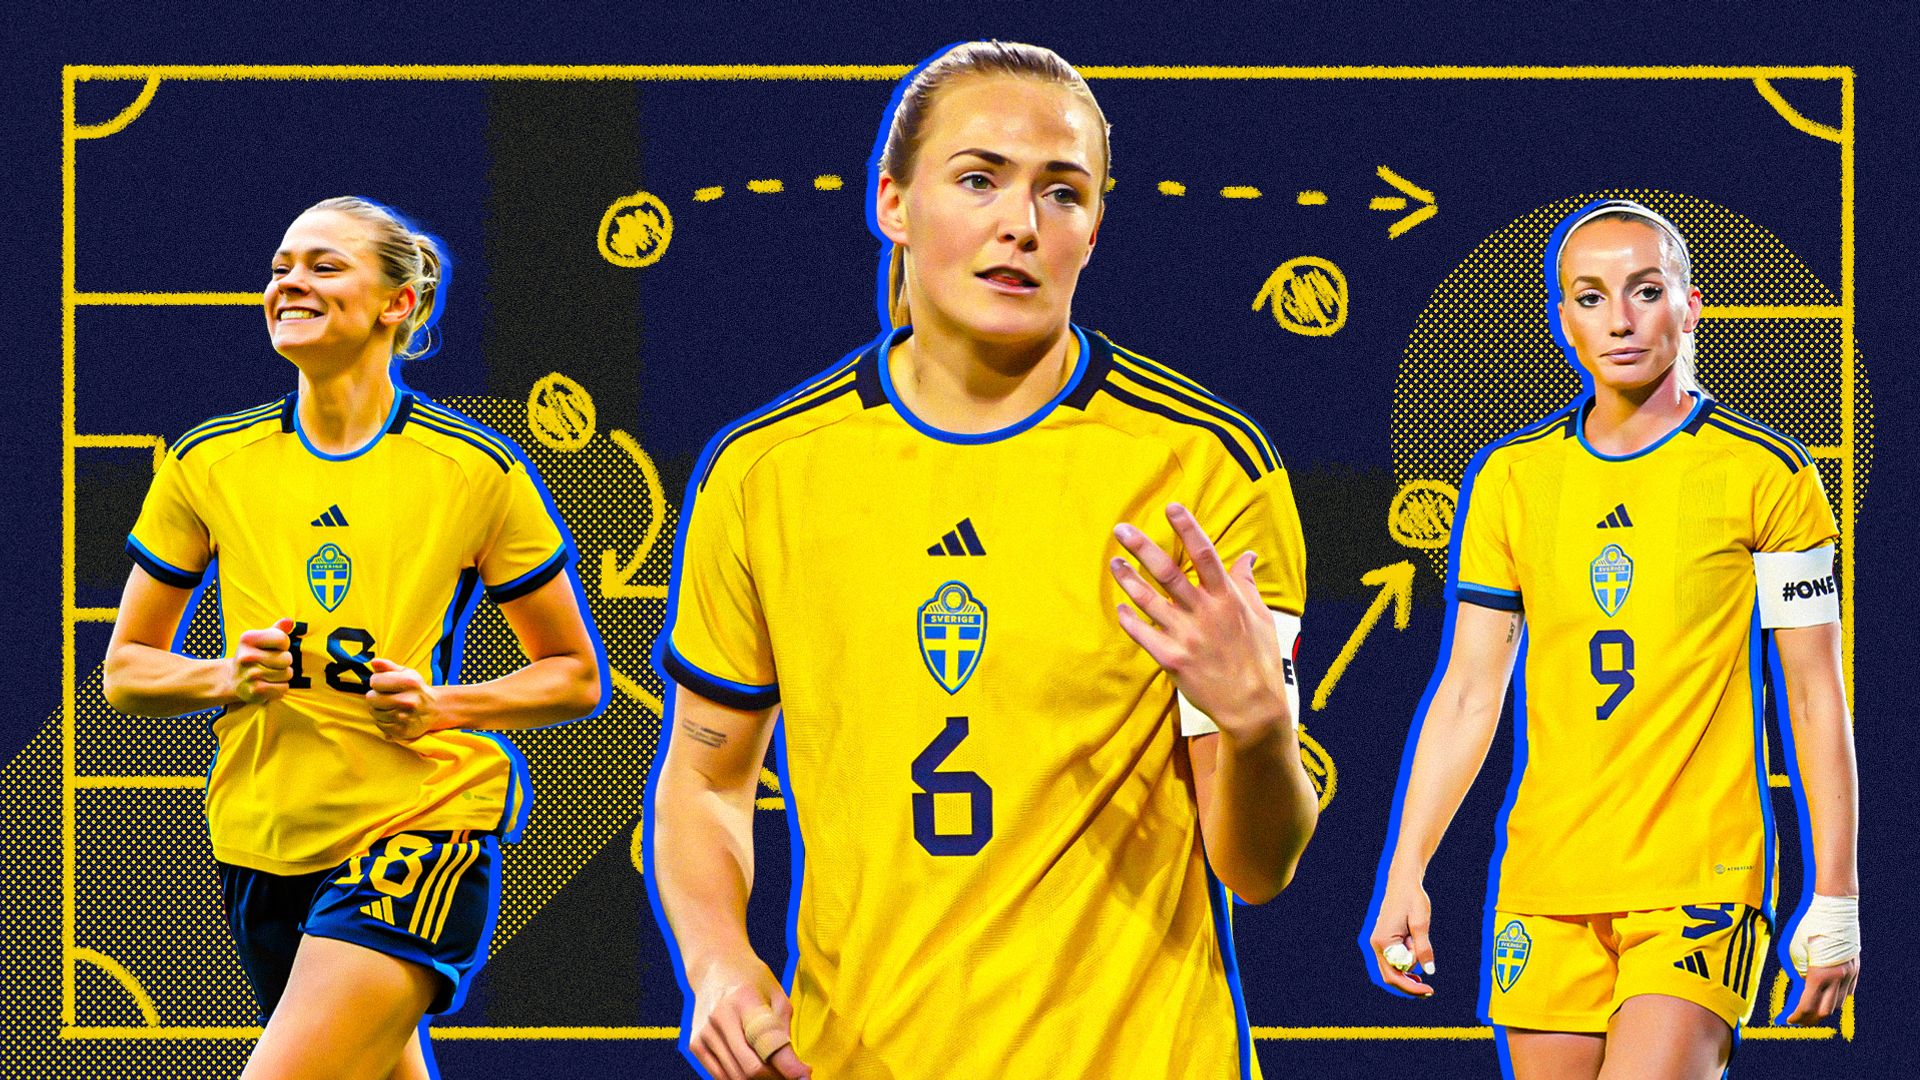 Fluidity, experience & 'Rolfo factor': Why Sweden are favourites for WWC final